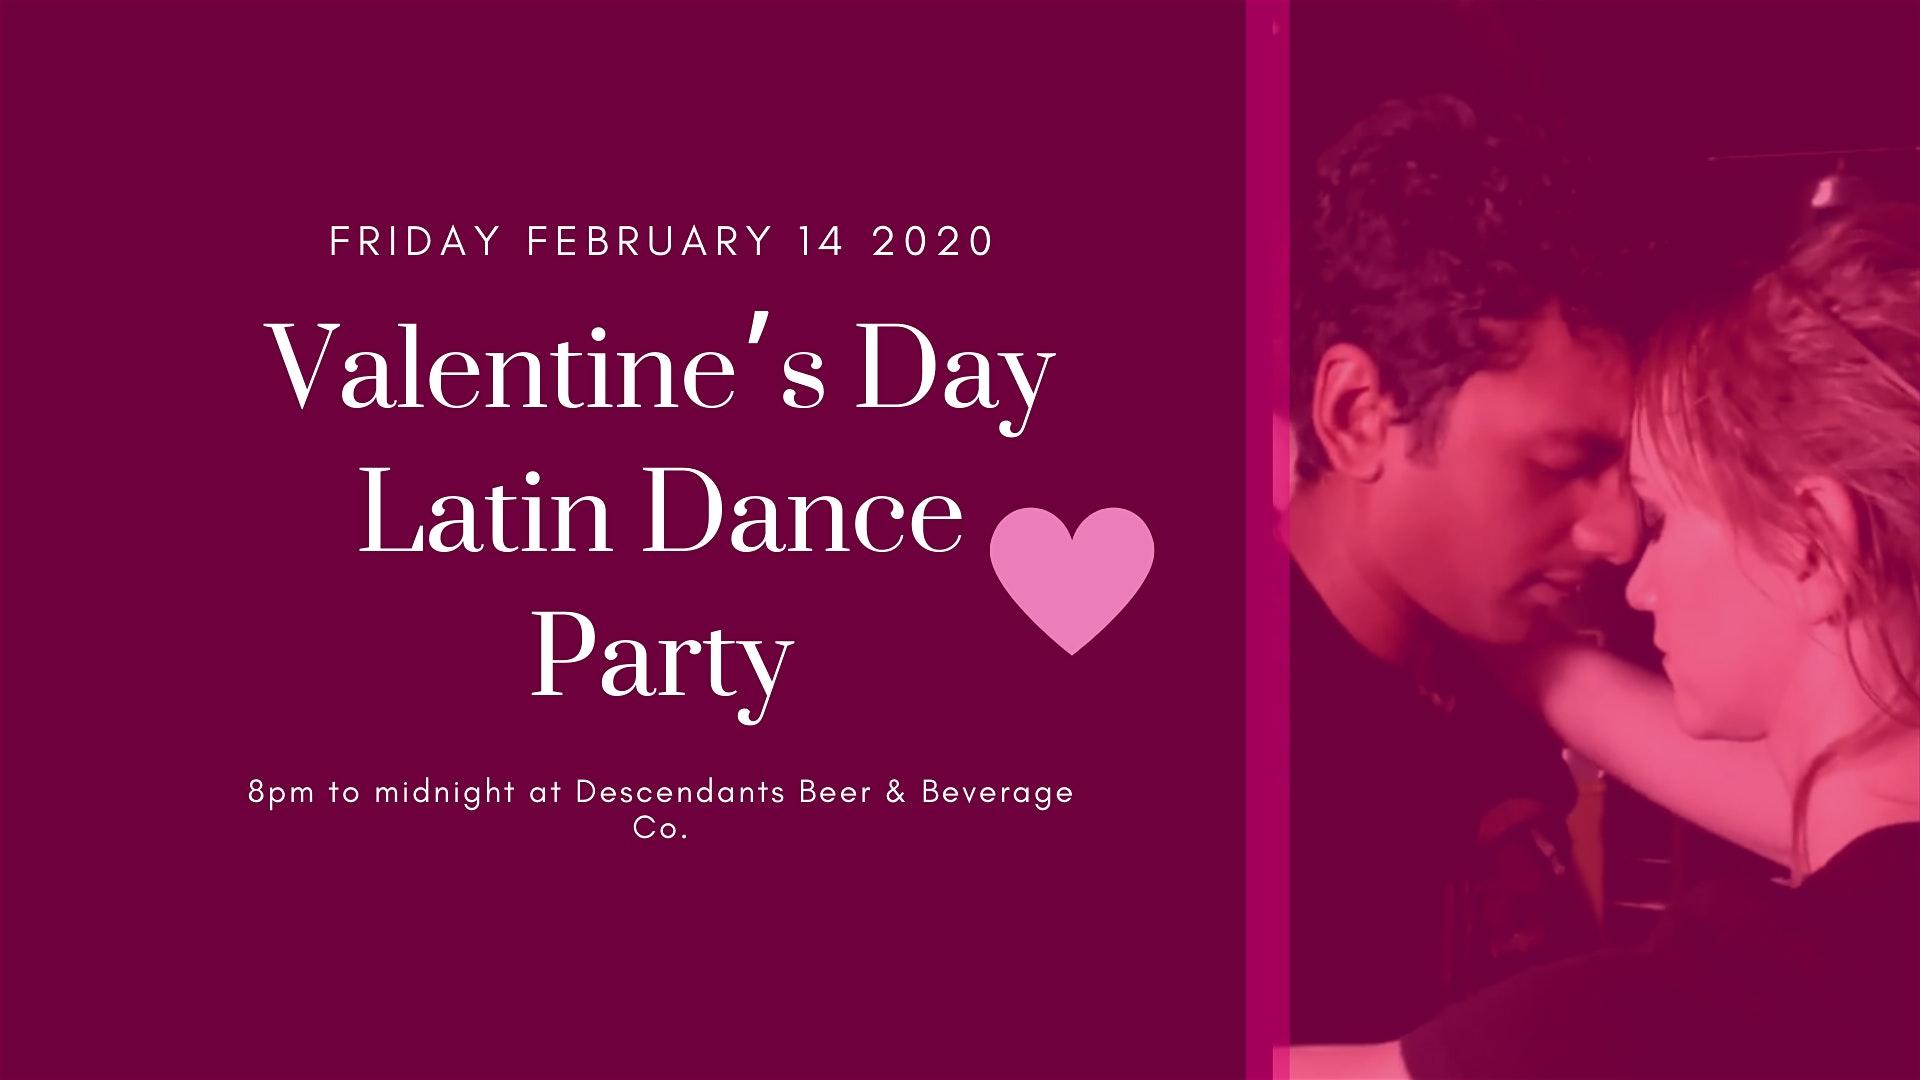 Valentine's Day Latin Dance Party at Descendants Beer